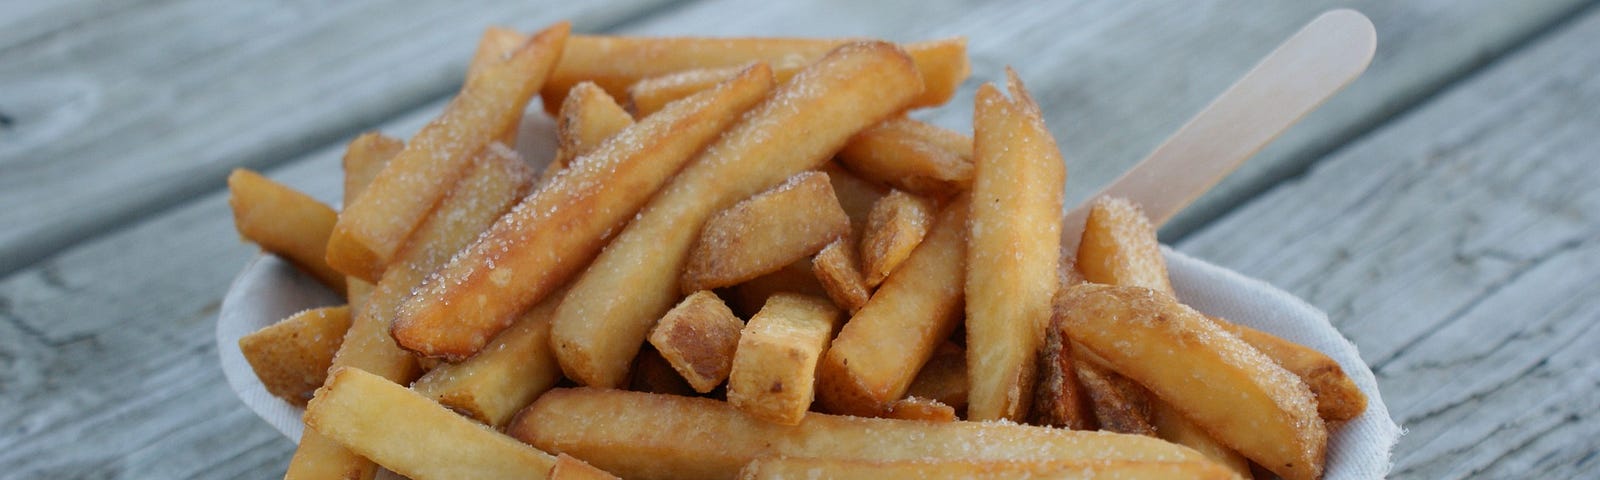 Take away chips / french fries